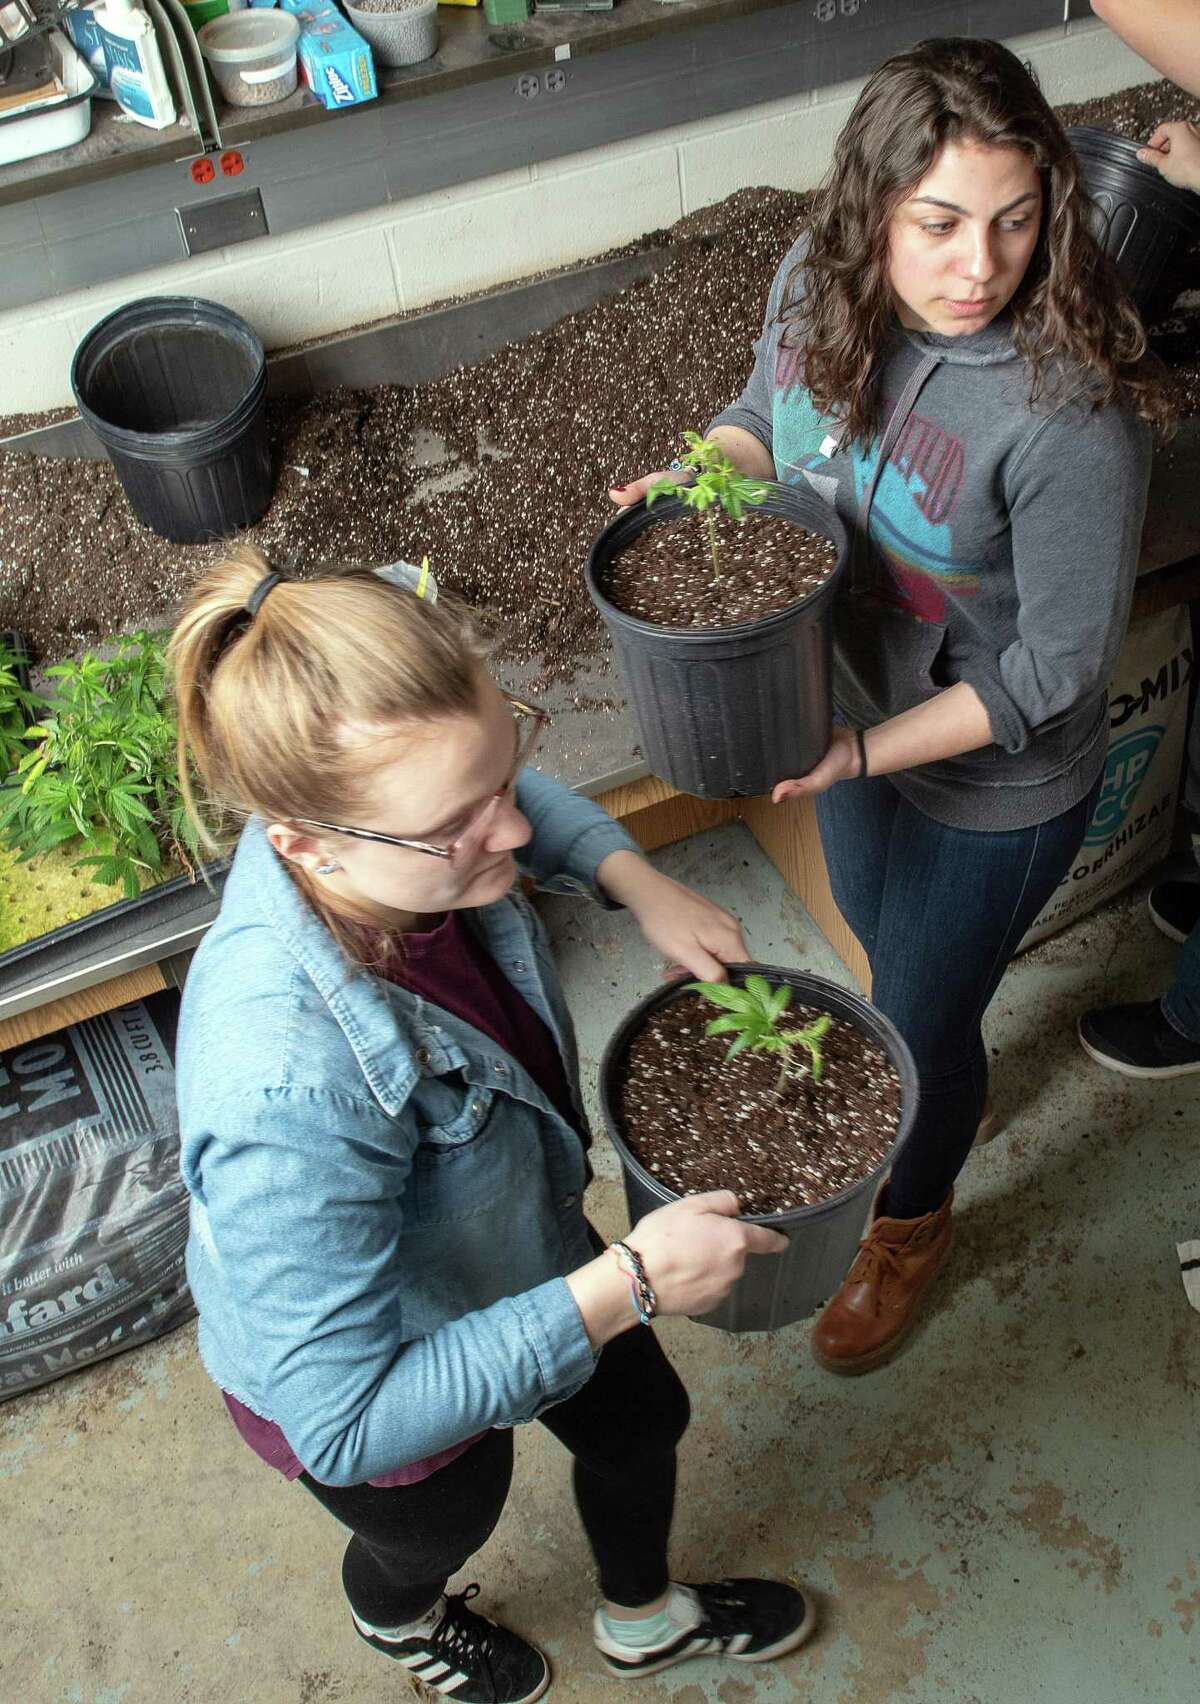 Photo by Mara Lavitt March 6, 2019 Agricultural Biotechnology Laboratory, University of Connecticut, Storrs UConn plant science:: juniors Ally Greene of Windsor Locks, left, and Jessica DiMatteo of Bethany potting hemp plants.